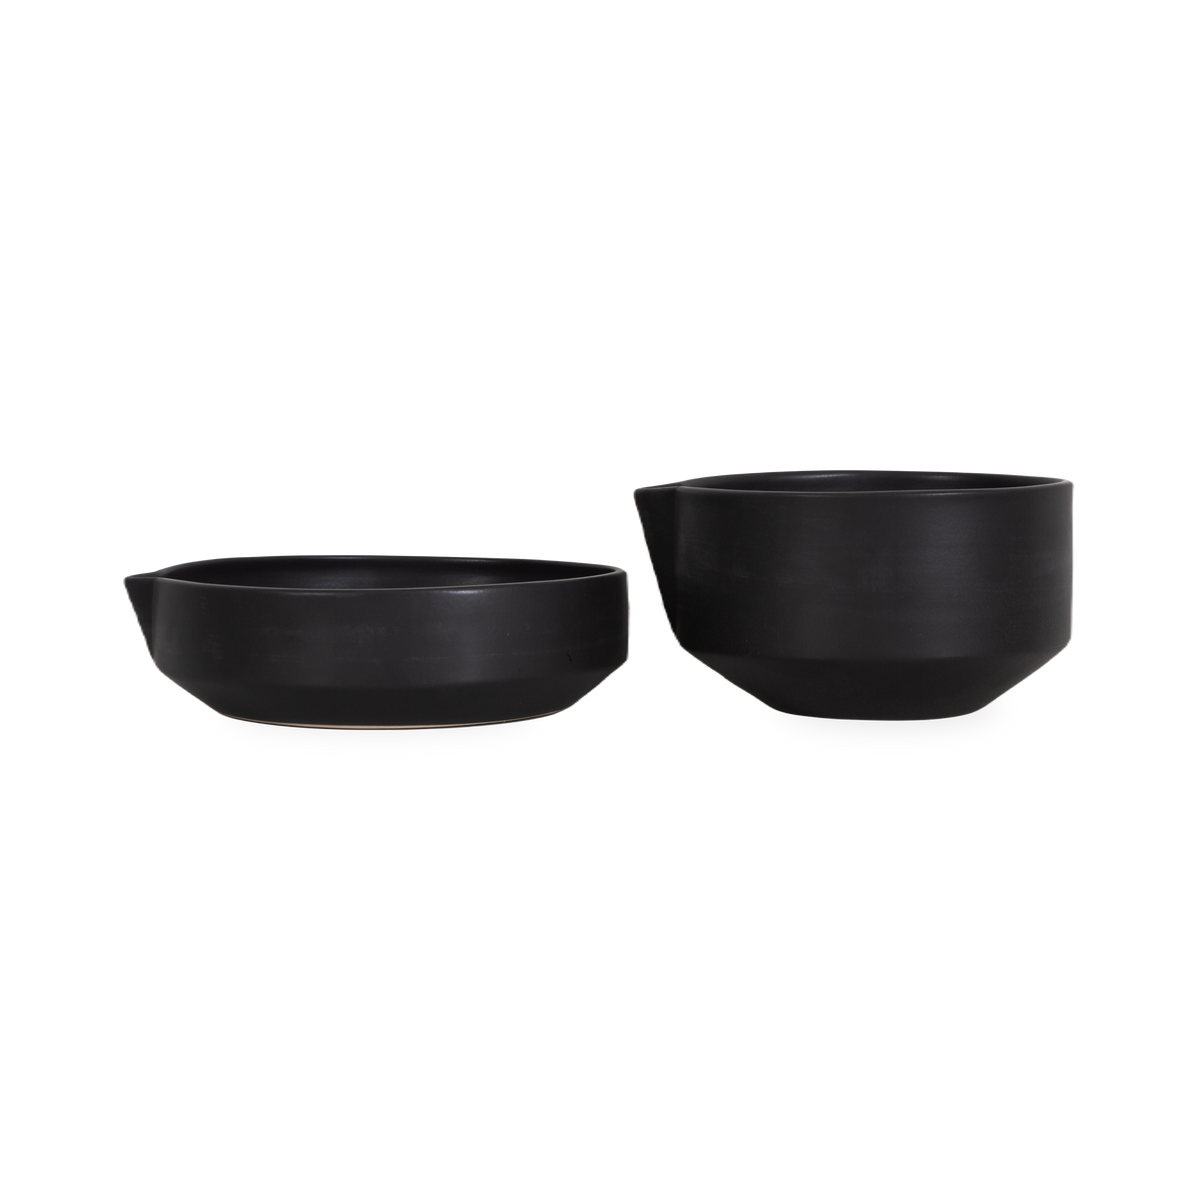 Characterized as timeless and modern, the Stoneware Bowl explores the idea of a simple design that is both elegant and functional.